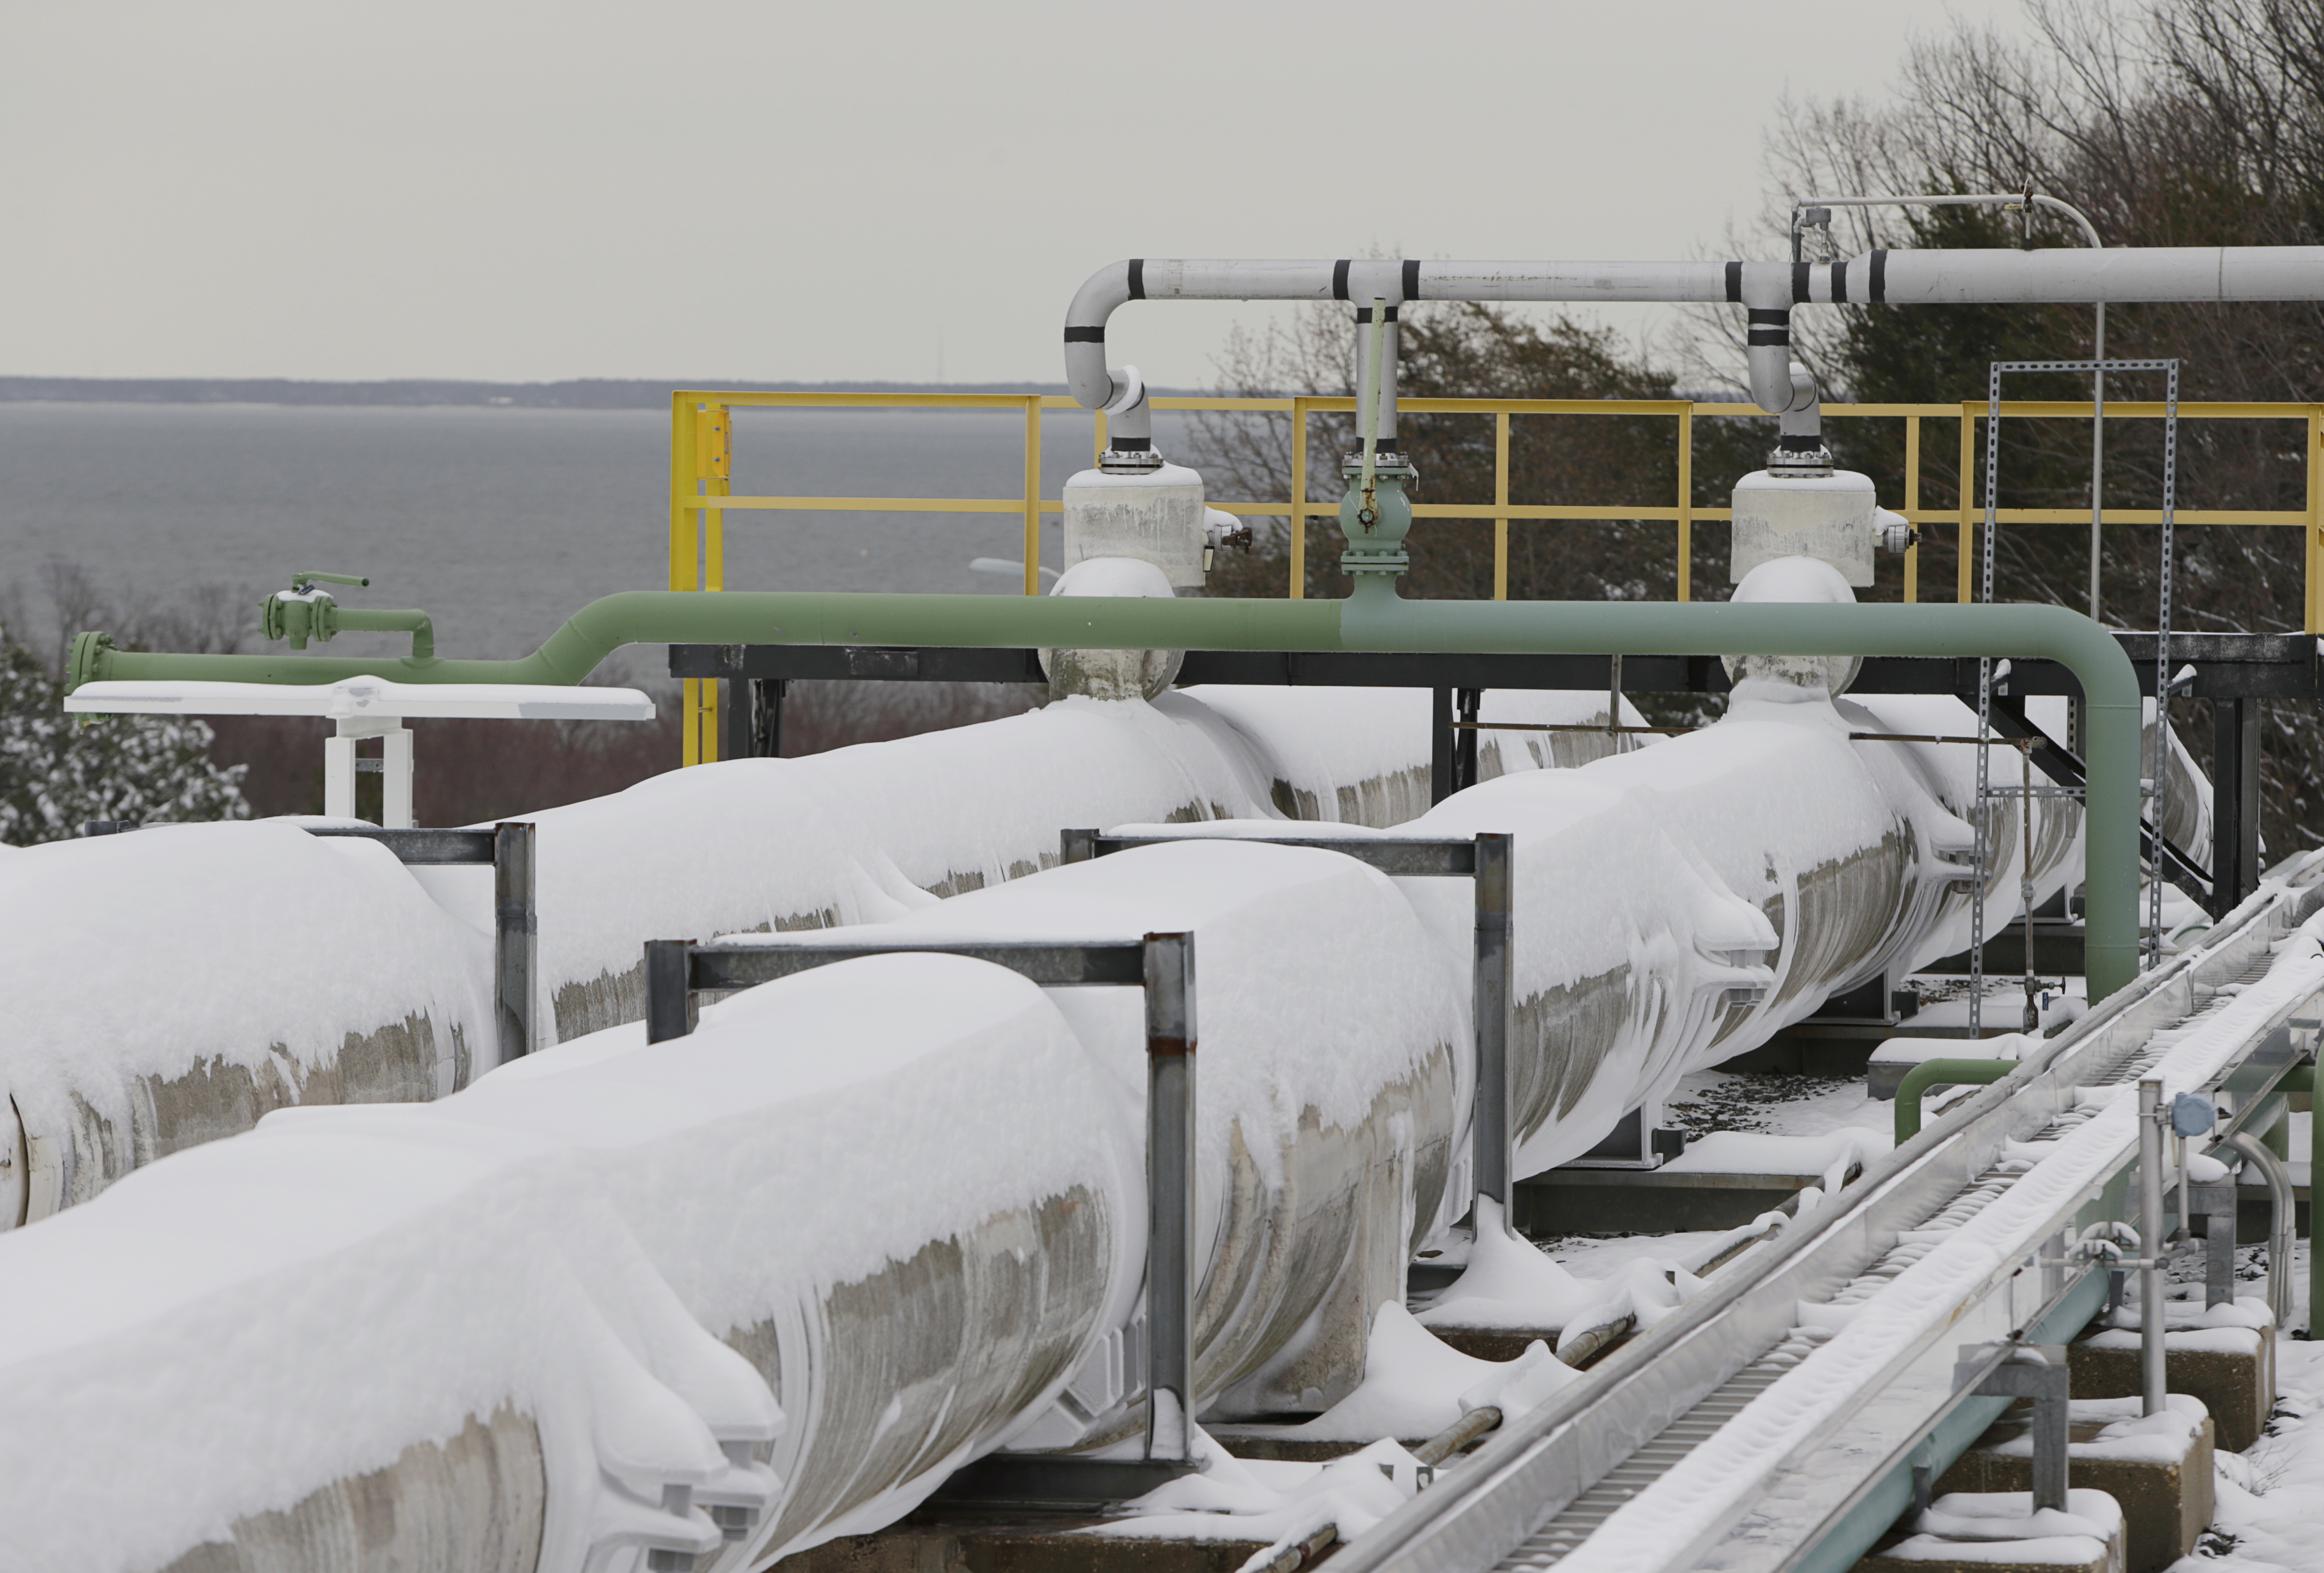 Snow covered transfer lines are seen at the Dominion Cove Point Liquefied Natural Gas (LNG) terminal in Lusby, Maryland March 18, 2014. The waters of the Chesapeake Bay are at rear.
 REUTERS/Gary Cameron  (UNITED STATES)